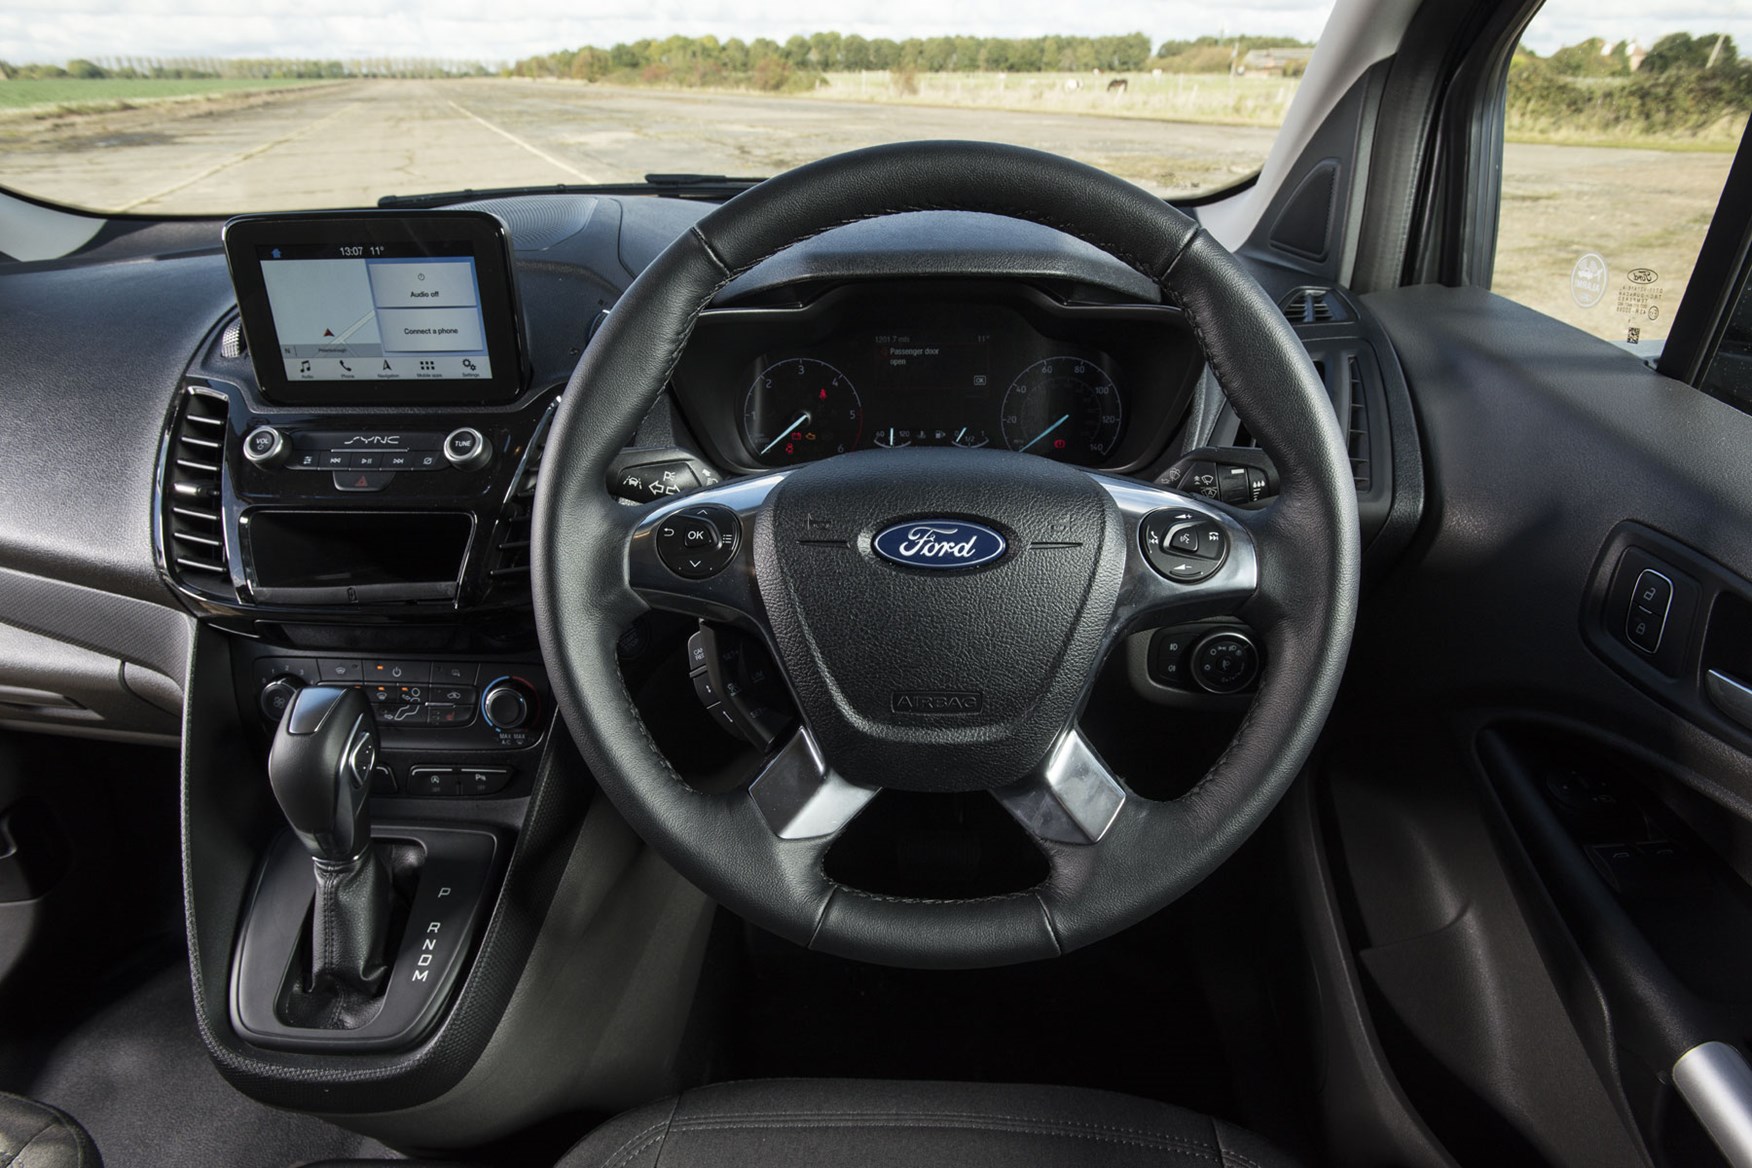 Ford Transit Connect automatic review - cab interior, steering wheel, 2019